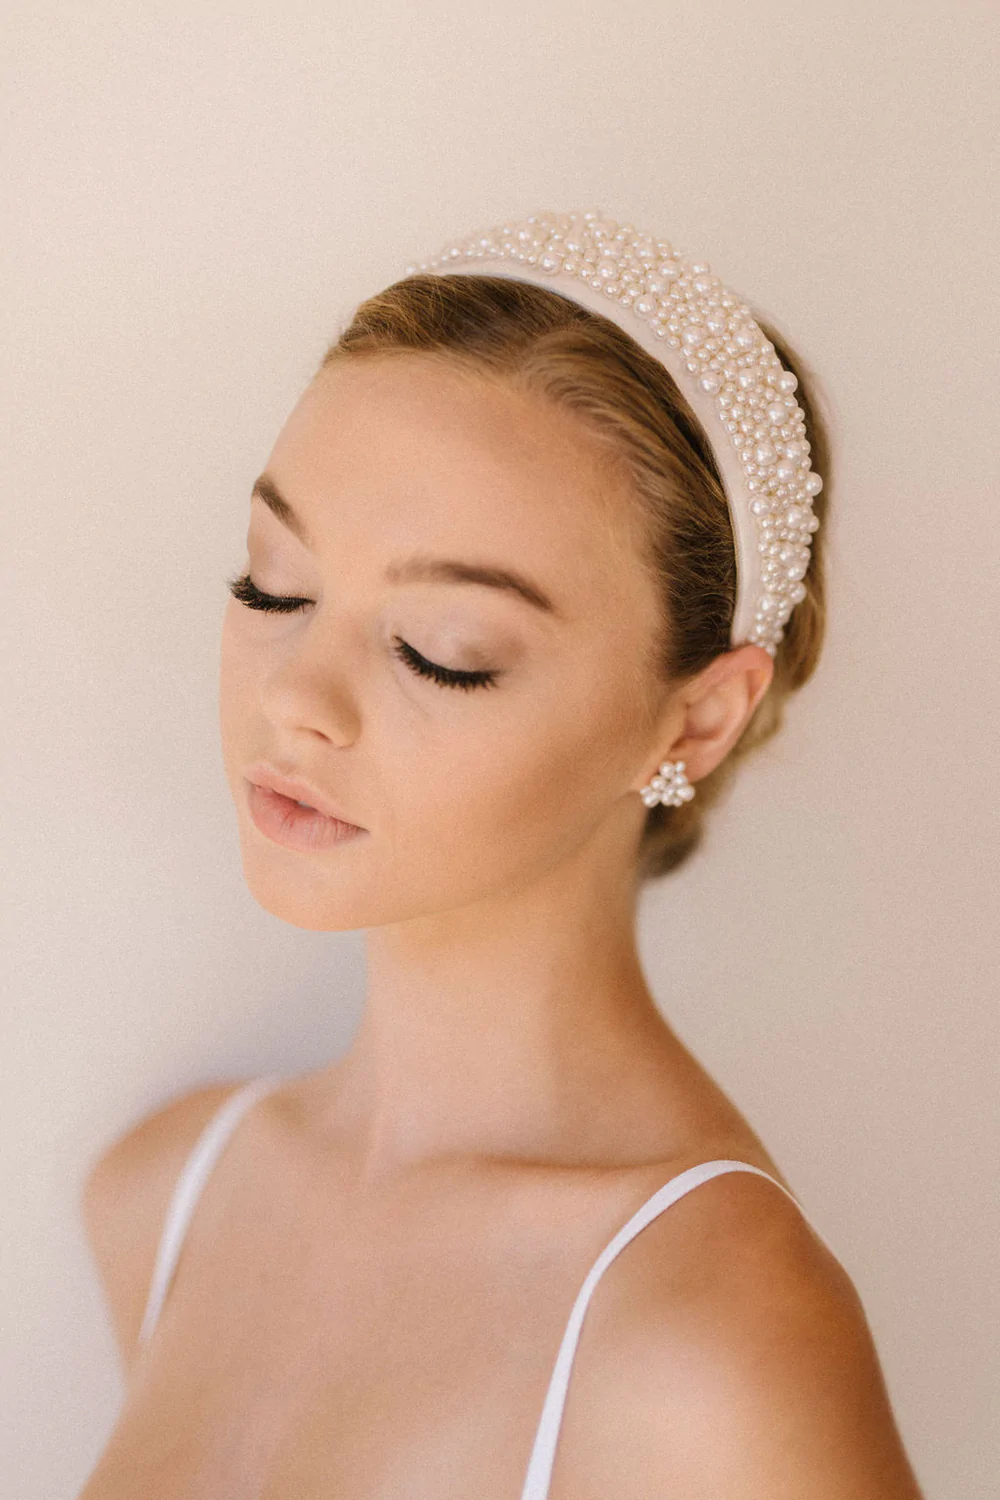 Couture bridal headbands from Untamed Petals. The Fallon Headband - A completely hand beaded headband adorned with countless pearls and woven into a handmade headband. 